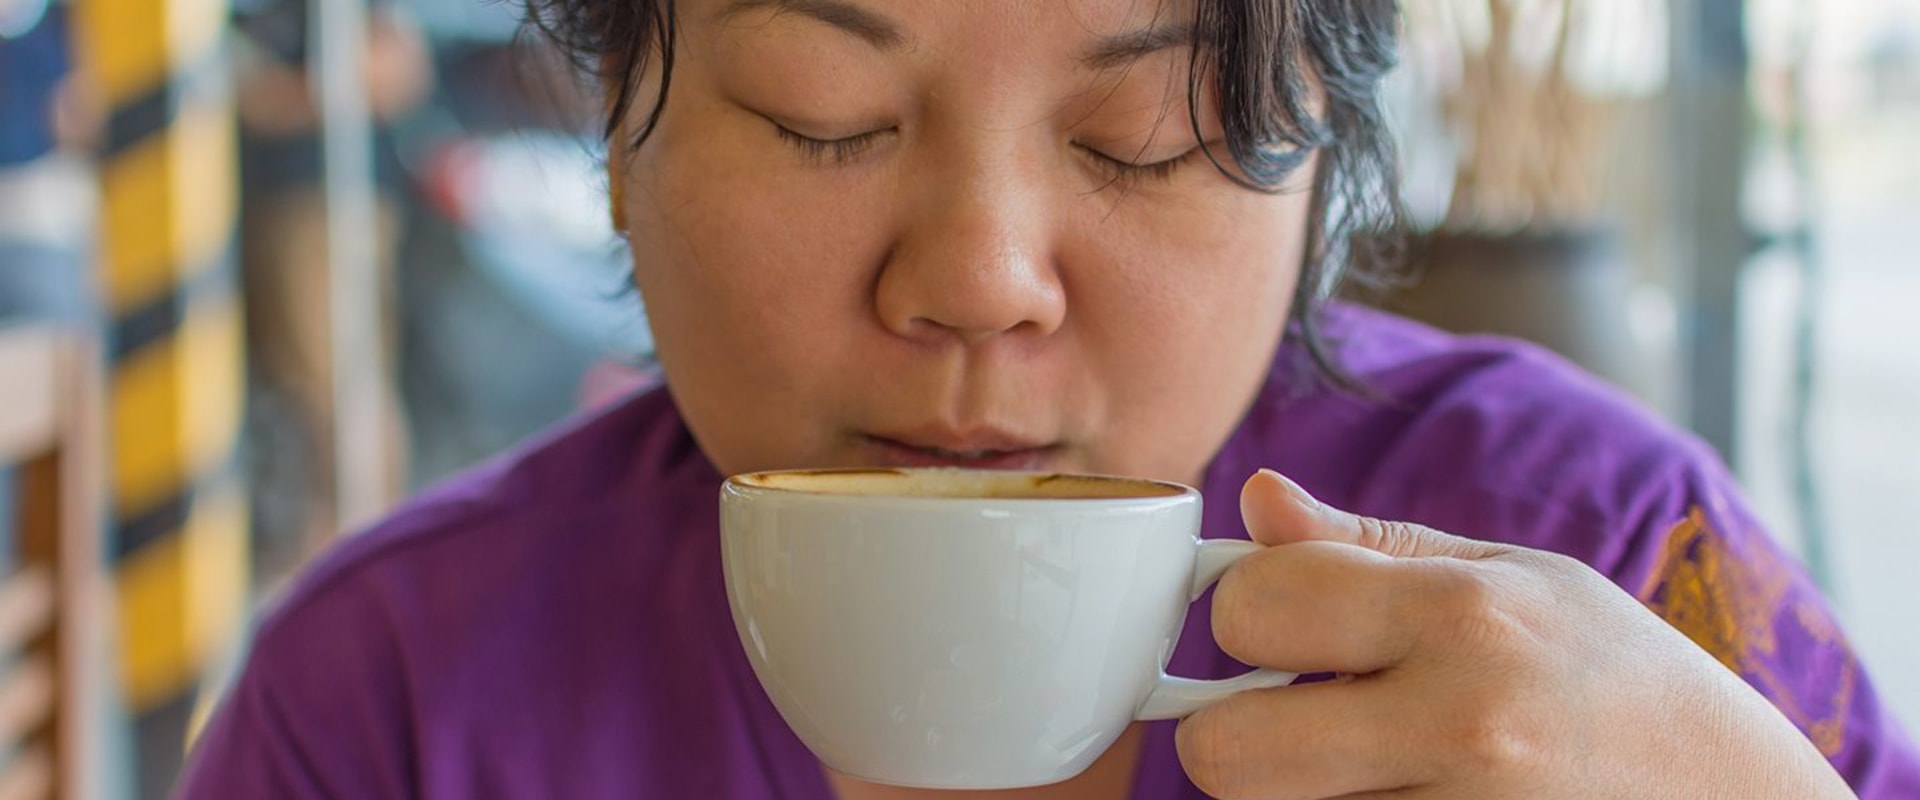 Can Diabetics Drink Coffee? The Benefits and Risks Explained